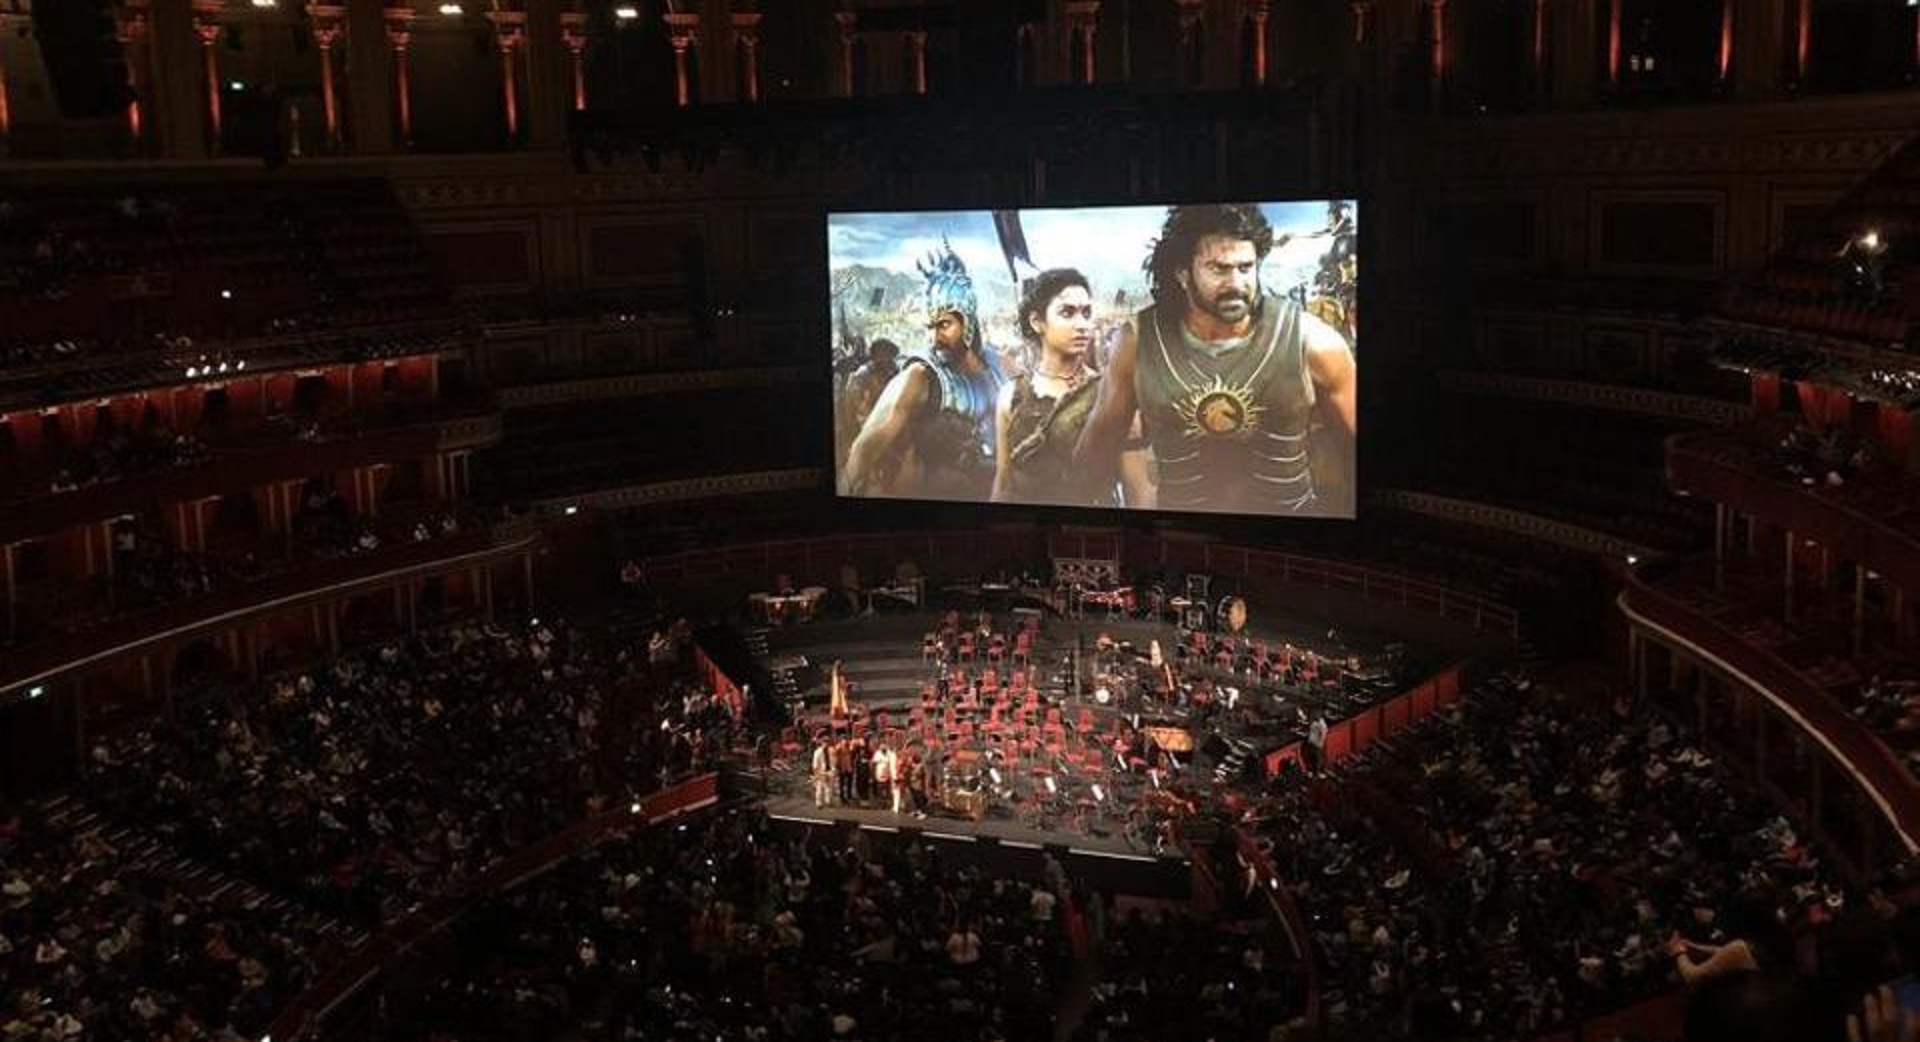 Baahubali Becomes First Indian Movie to be Shown at Royal Albert Hall, London